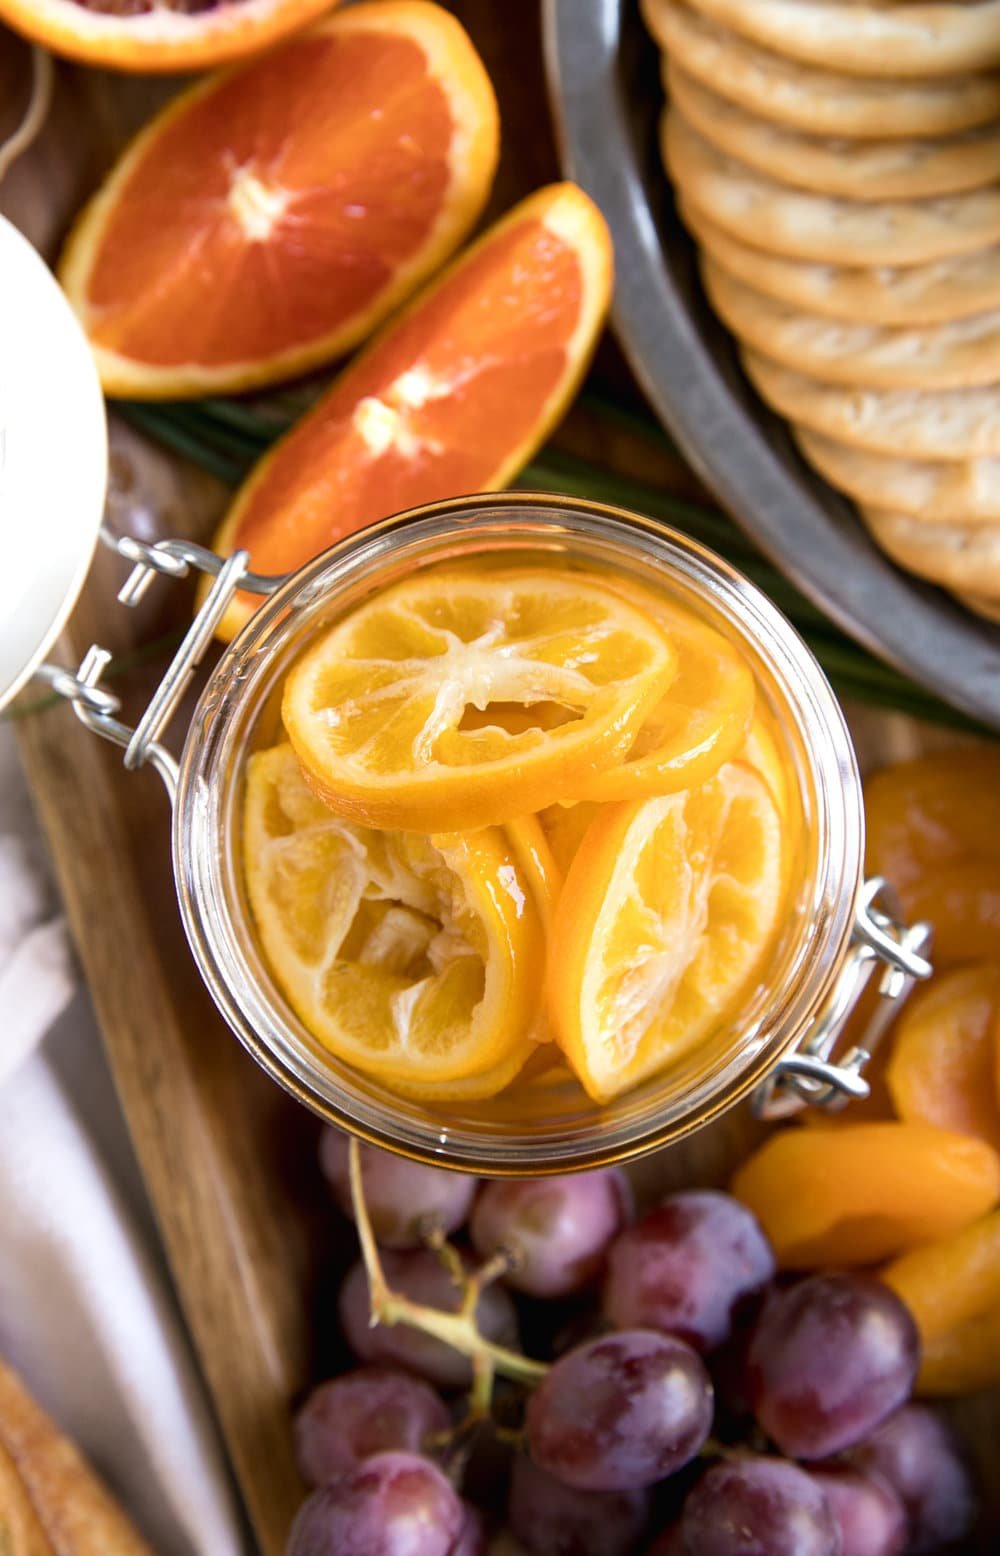 oranges in jar among grapes and crackers